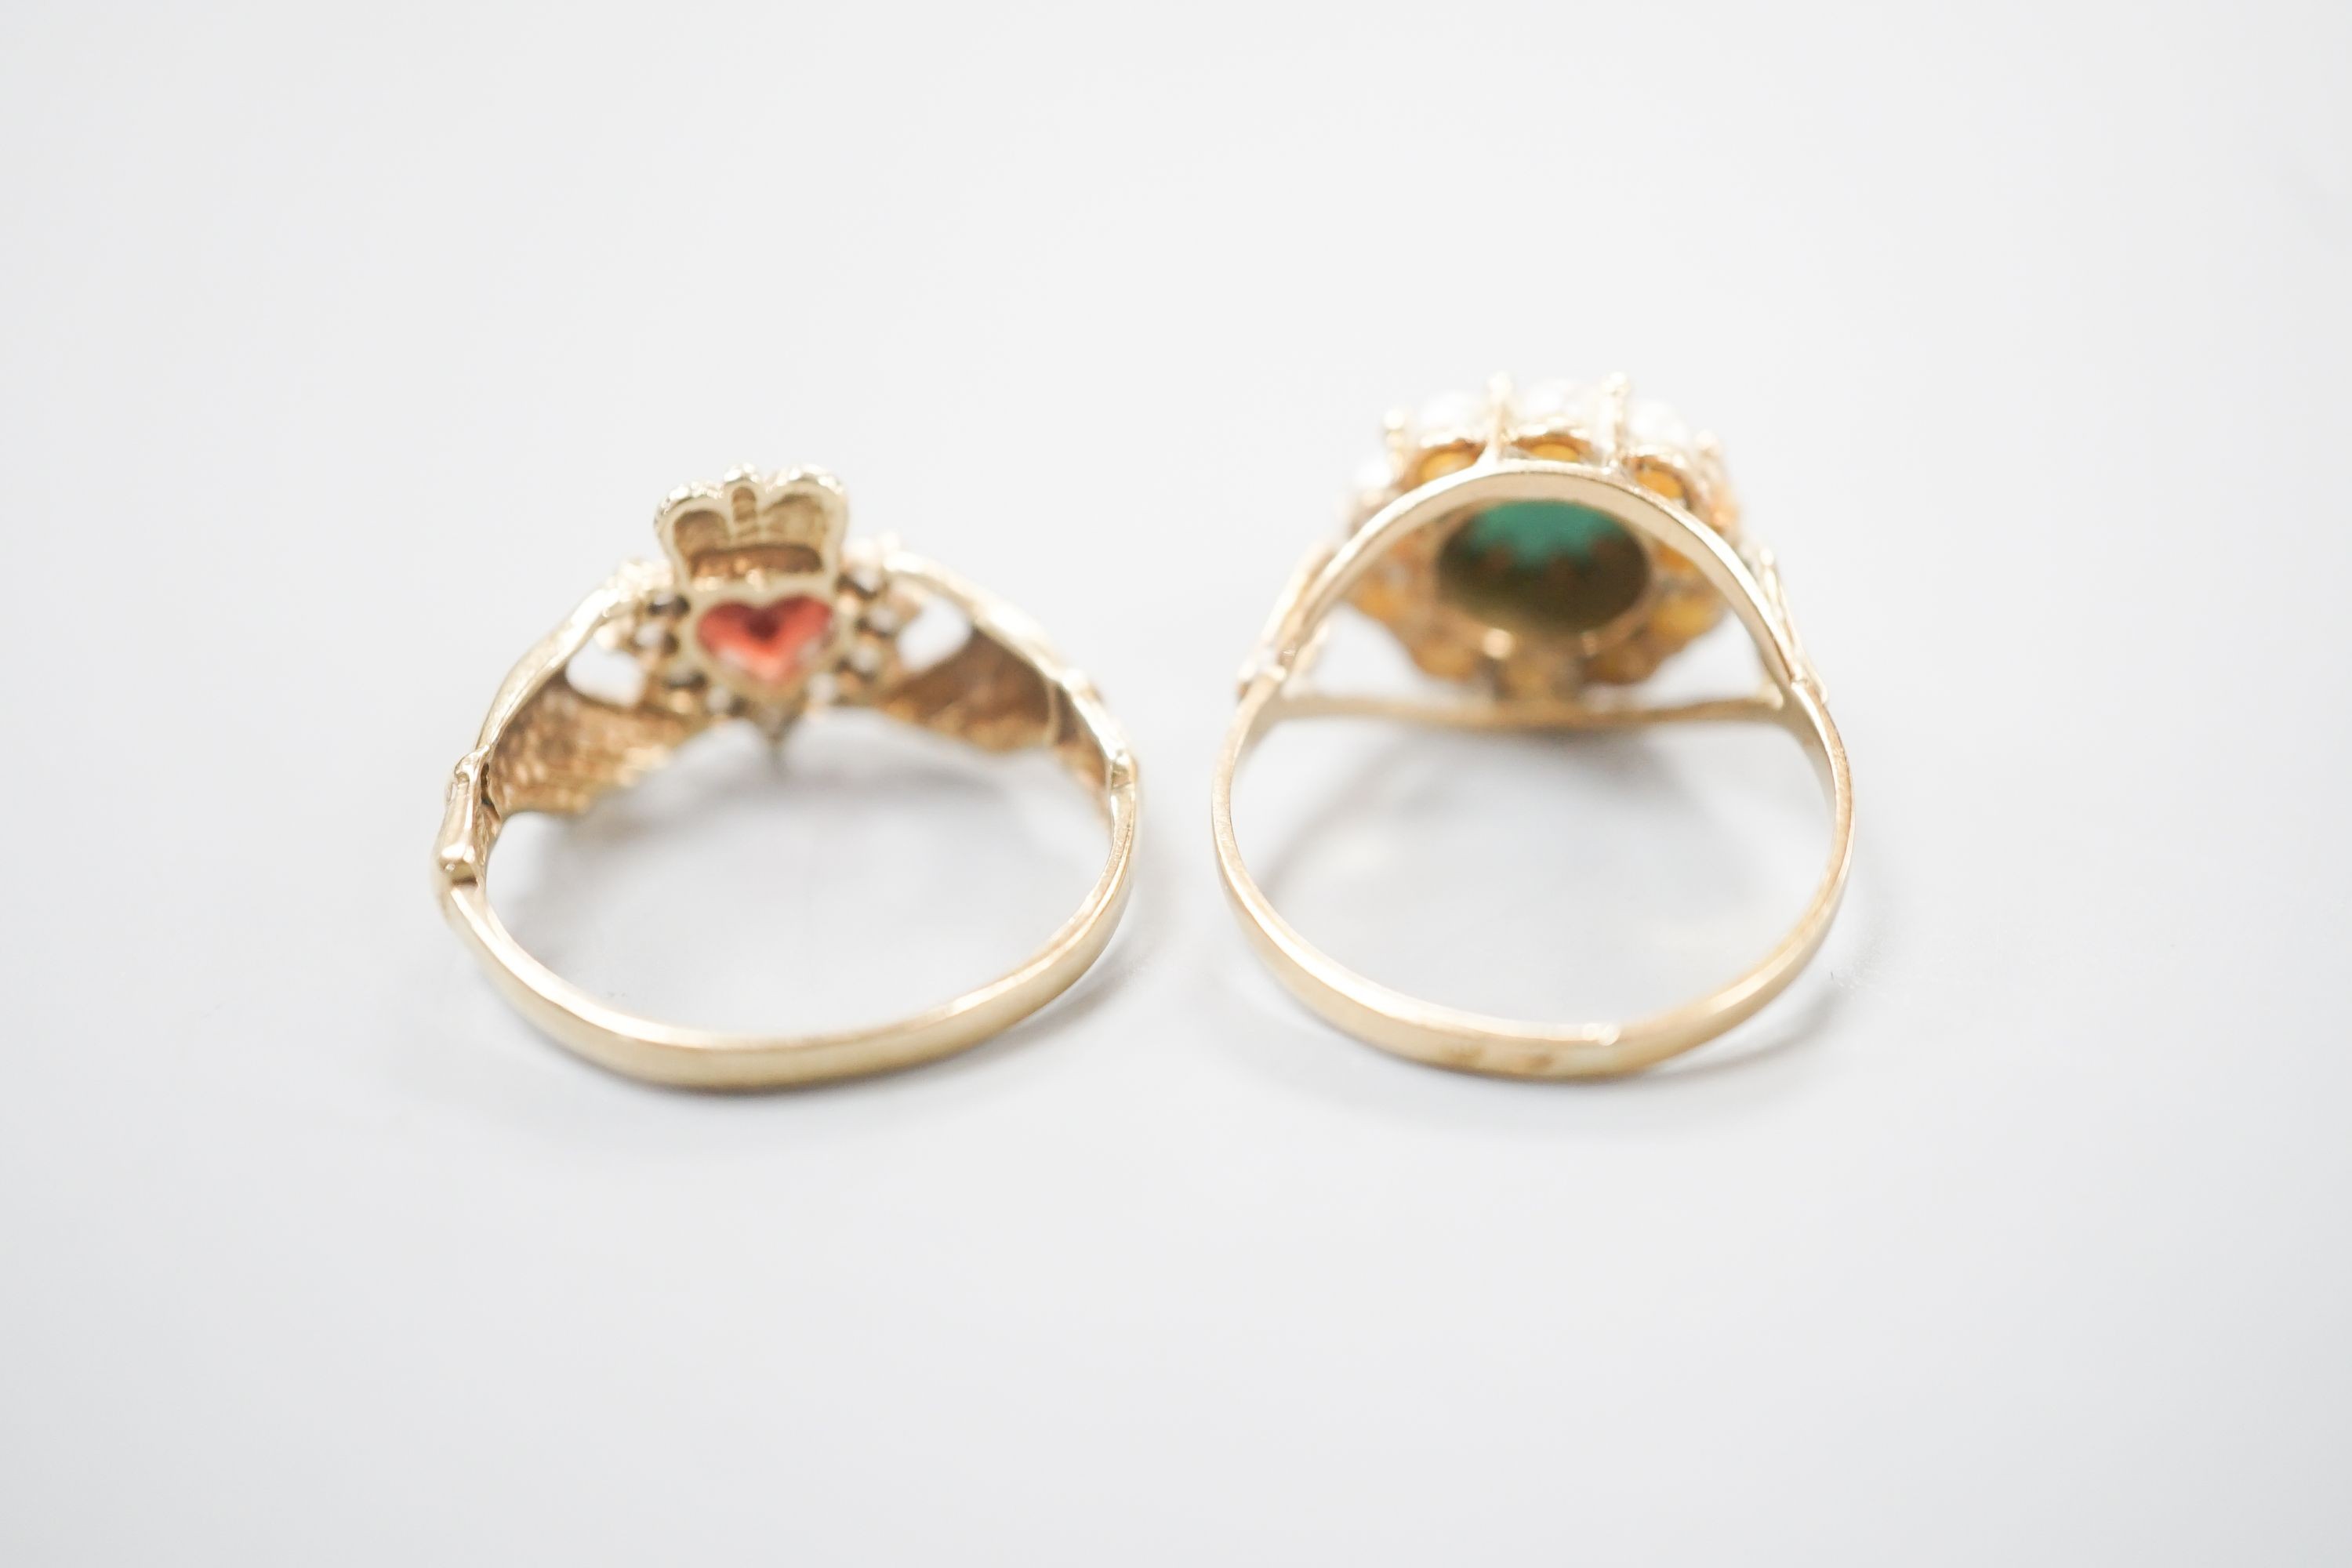 A 9ct gold and gem set claddagh ring, size L, gross 2.2 grams and a yellow metal, turquoise and seed pearl ring, gross 3 grams.